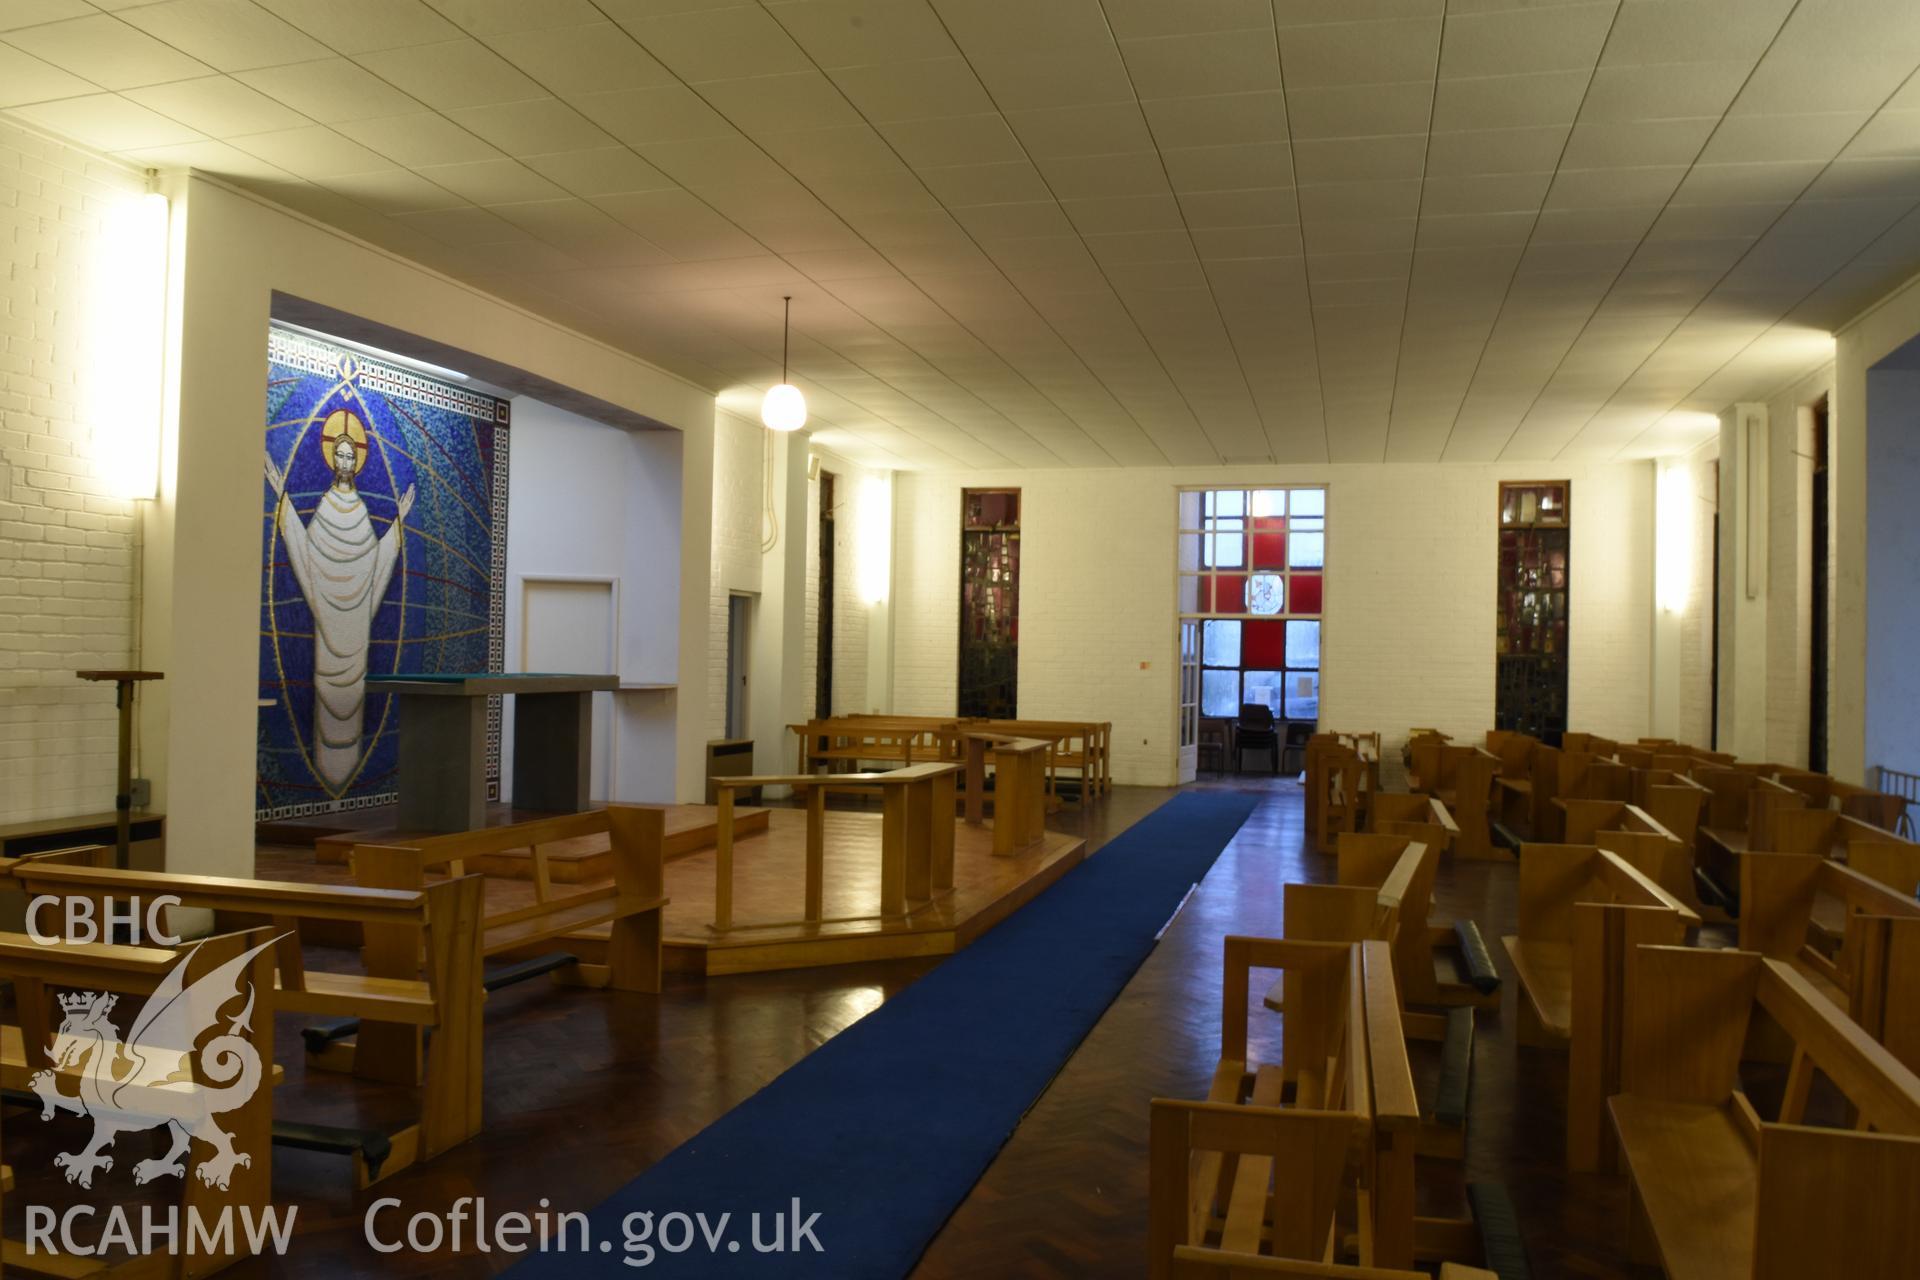 The Resurrection of Our Saviour Catholic Church, interior. Photographed by Sue Fielding on 11th January 2019.